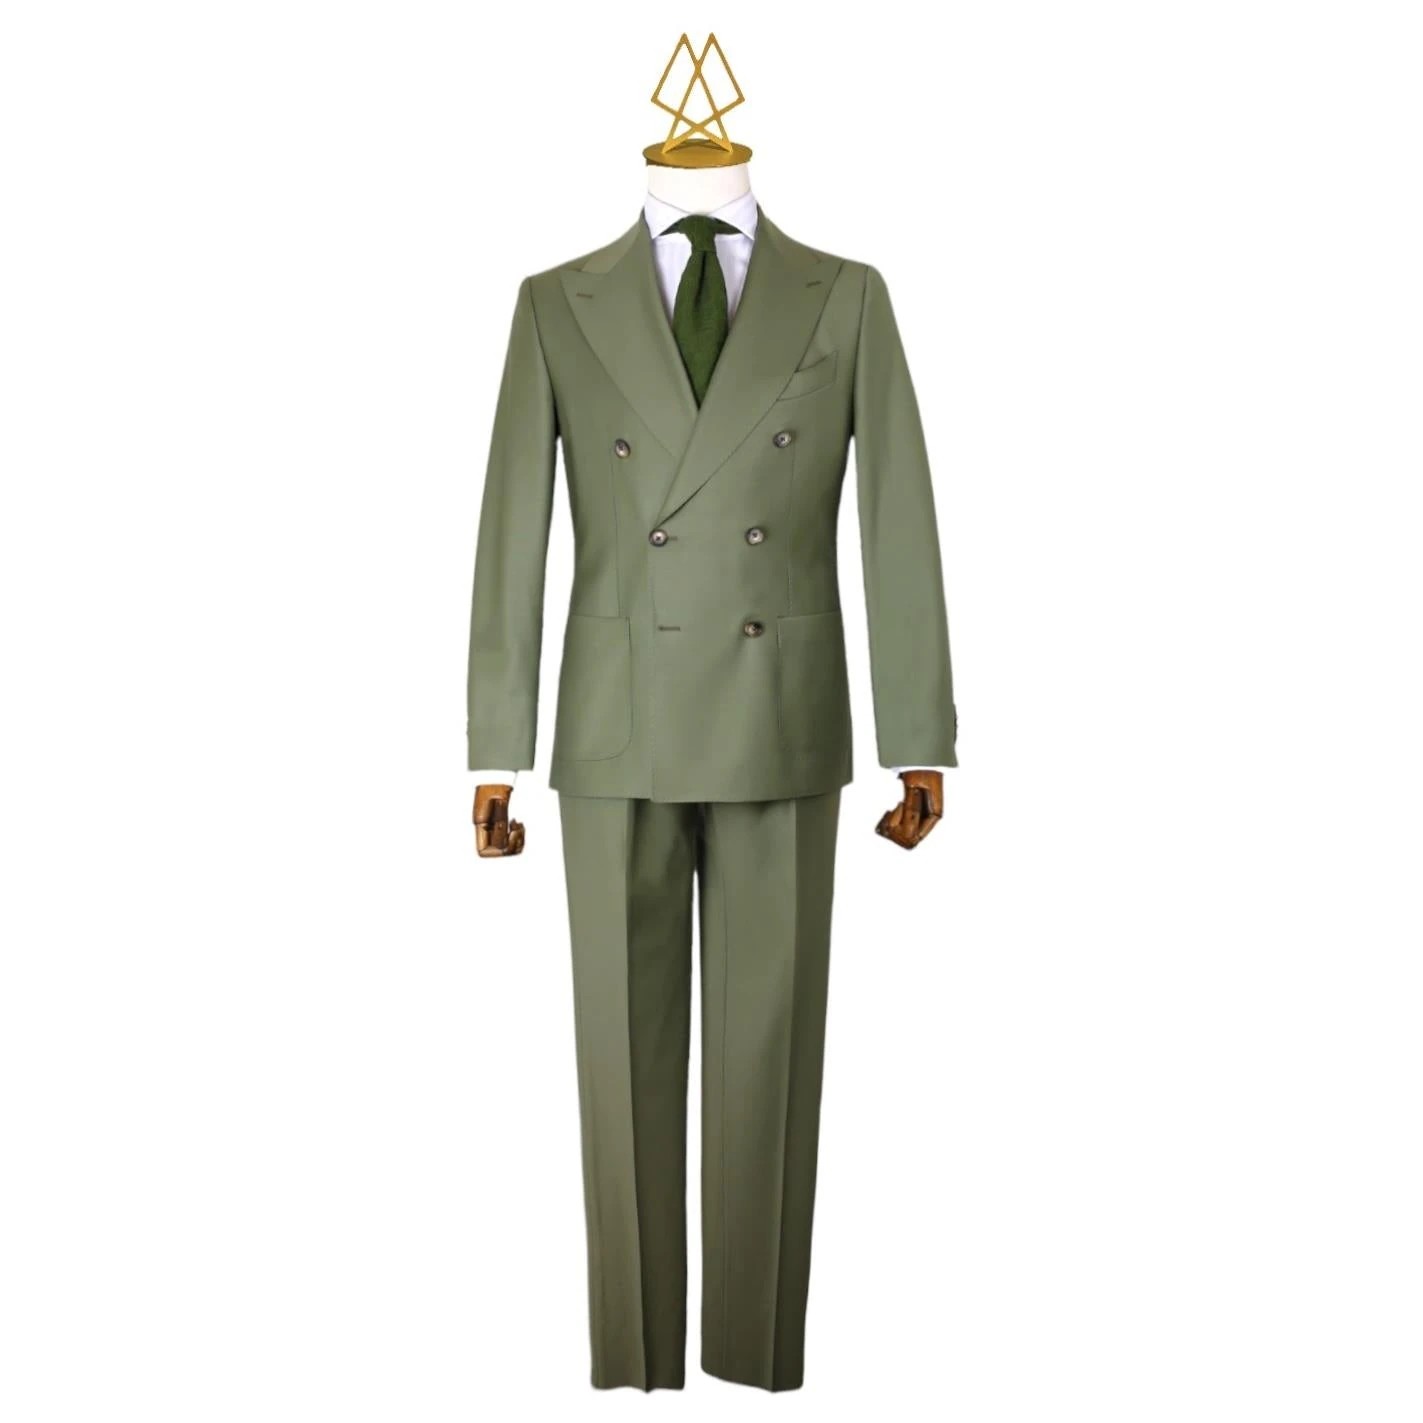 GREEN DOUBLE-BREASTED TROPHY SUIT